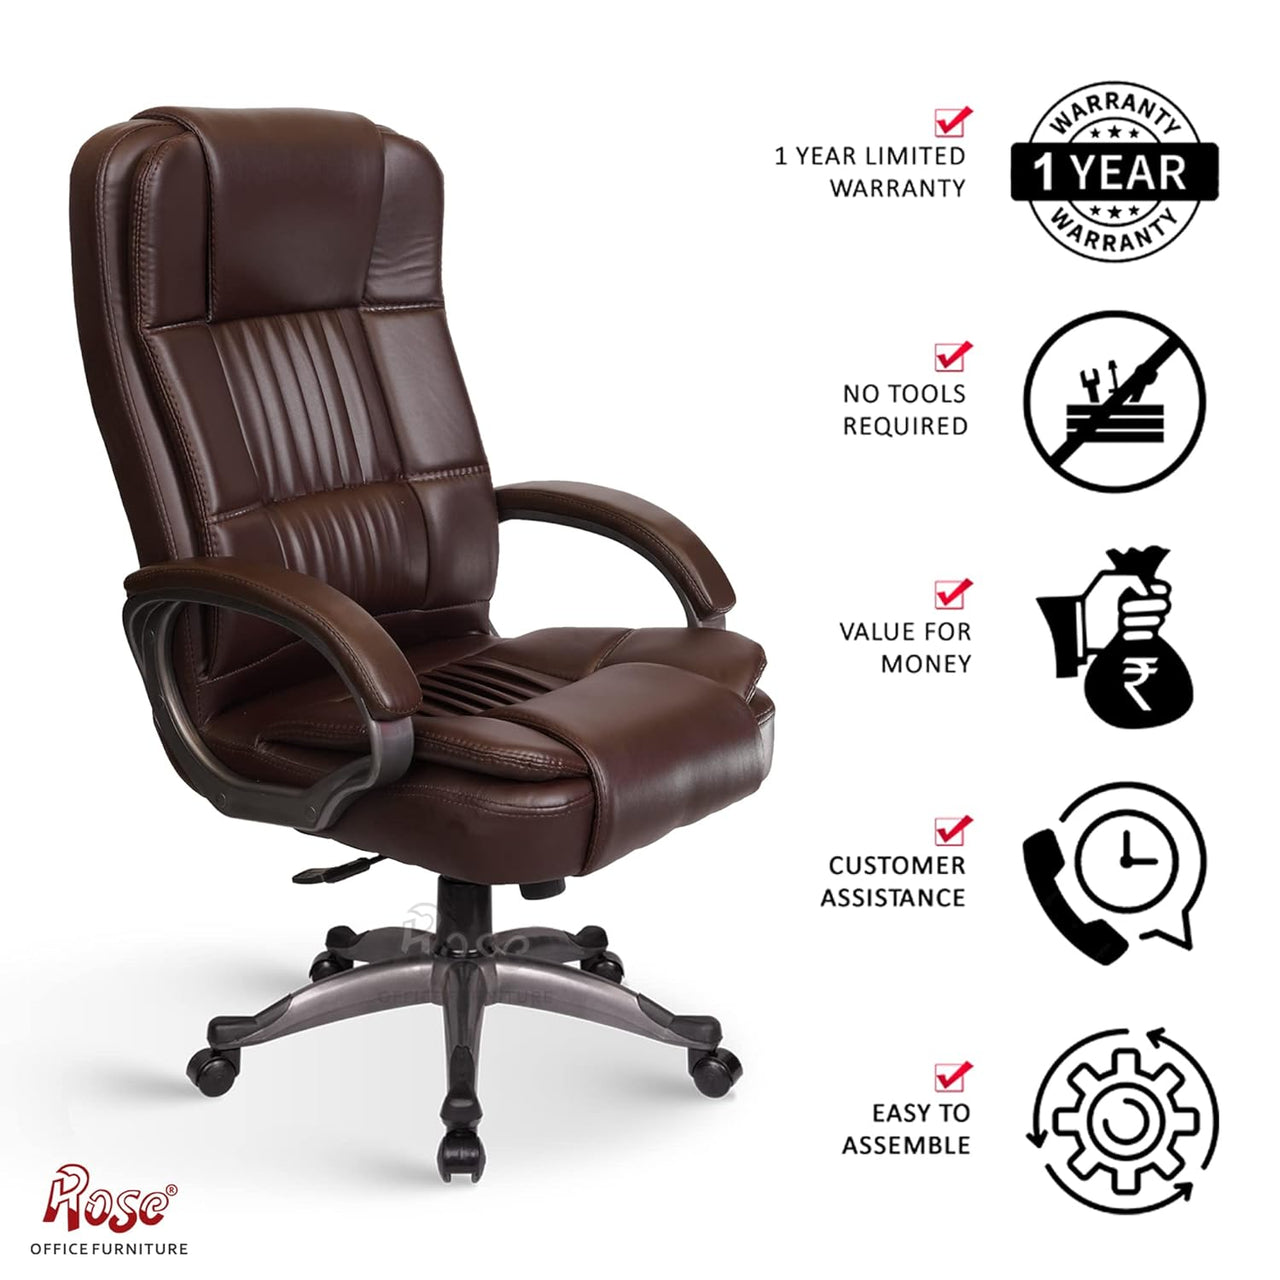 Lucci Leatherette Executive High Back Revolving Office Chair (Brown)